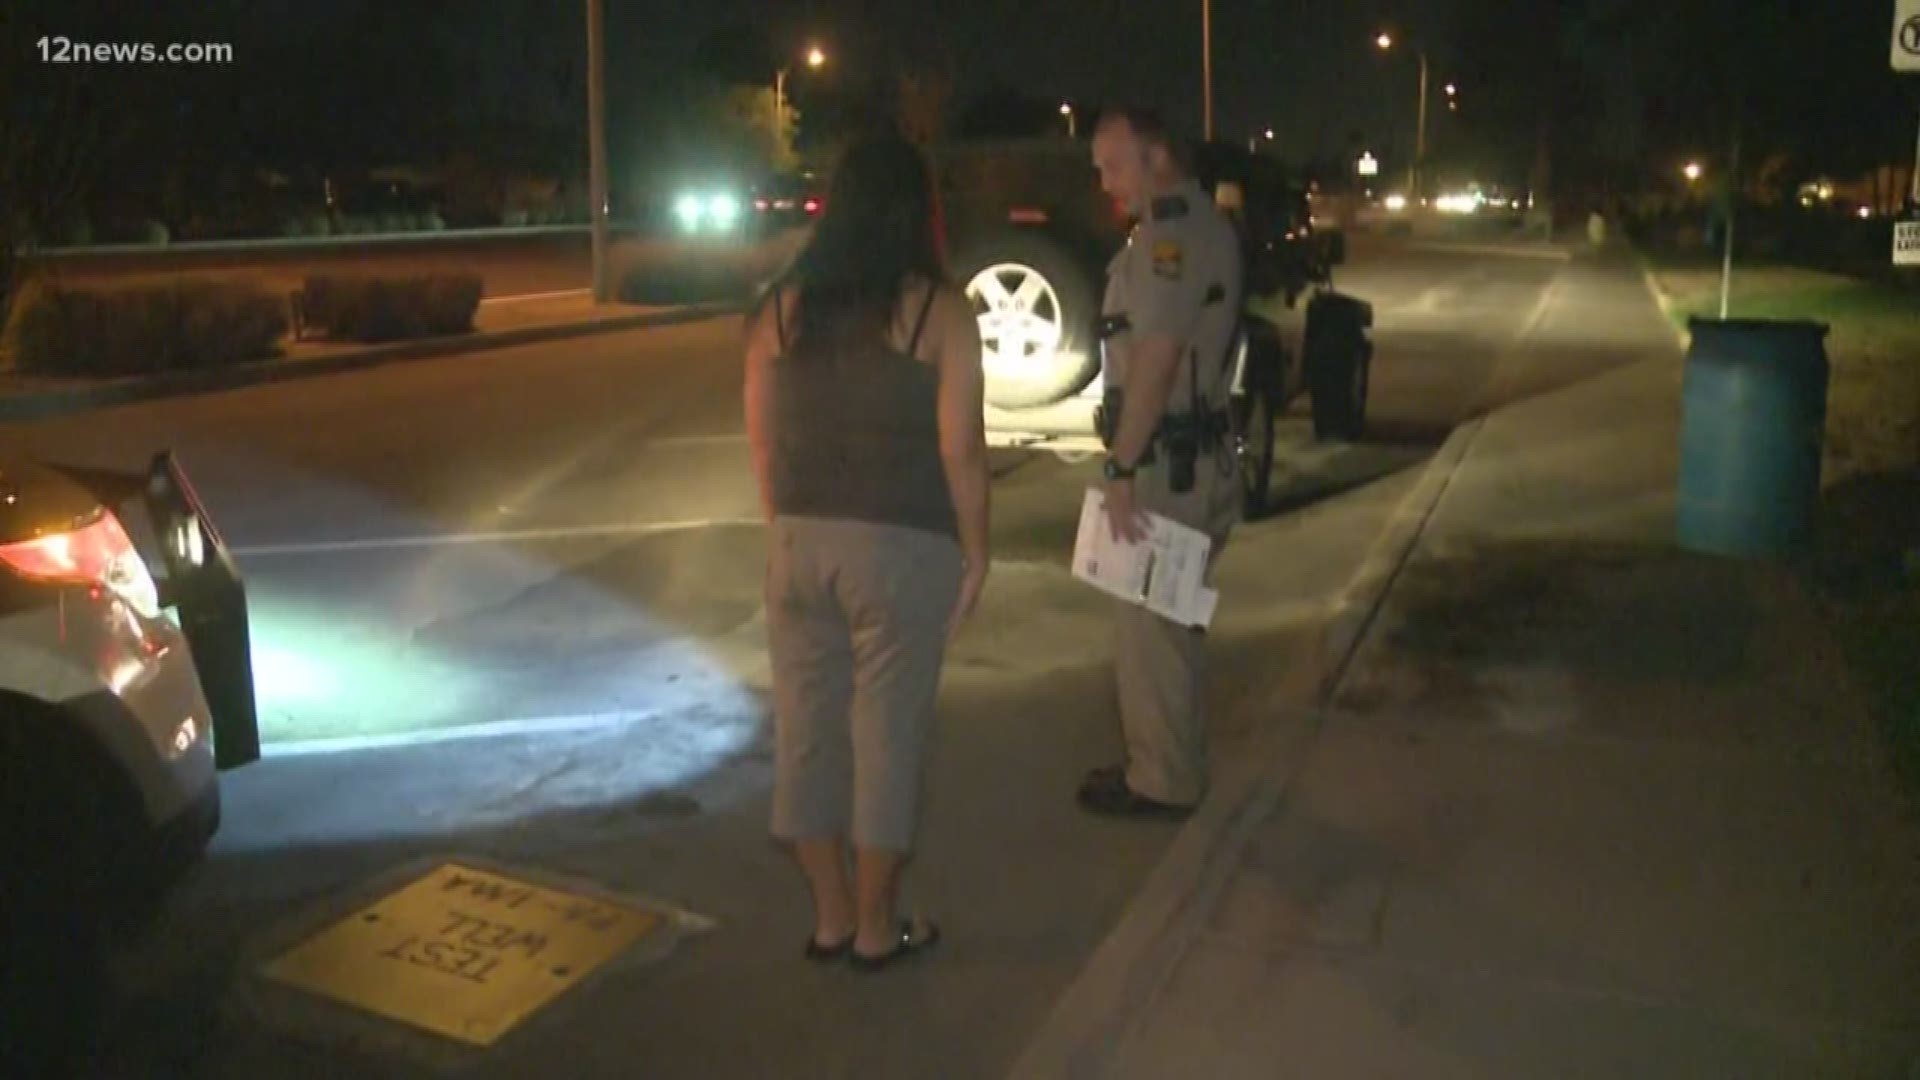 New figures released by the Arizona Office of Highway Safety say DUI alcohol arrests were down over Memorial Day weekend, but DUI drug arrests increased.